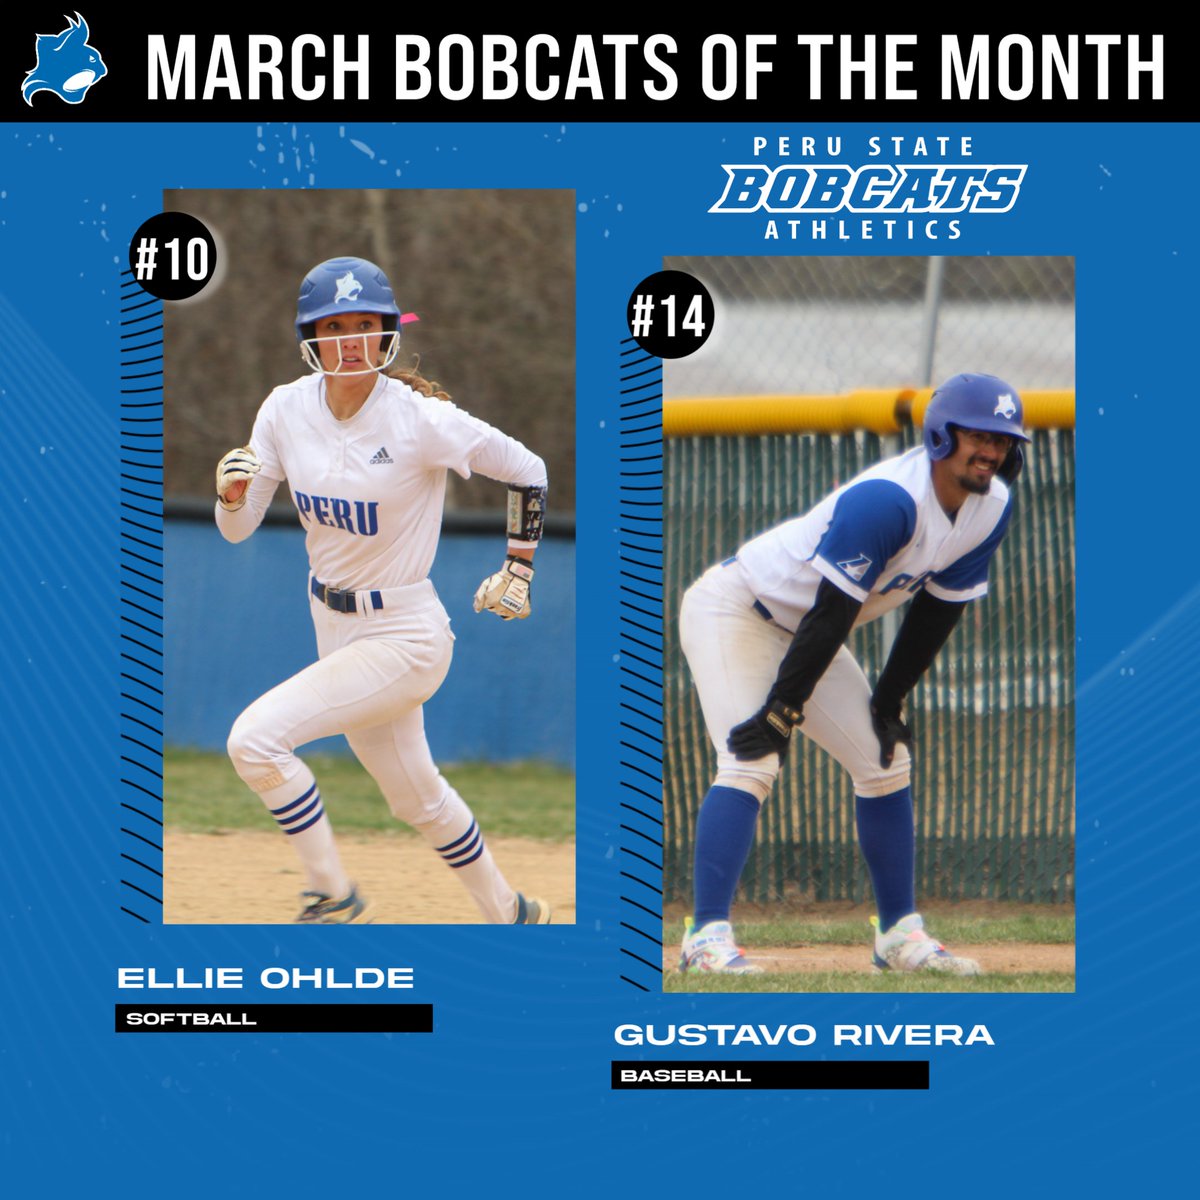 Congratulations to Ellie Ohlde and Gustavo Rivera on earning March Bobcats of the Month! #ClawsOut | #PeruState156